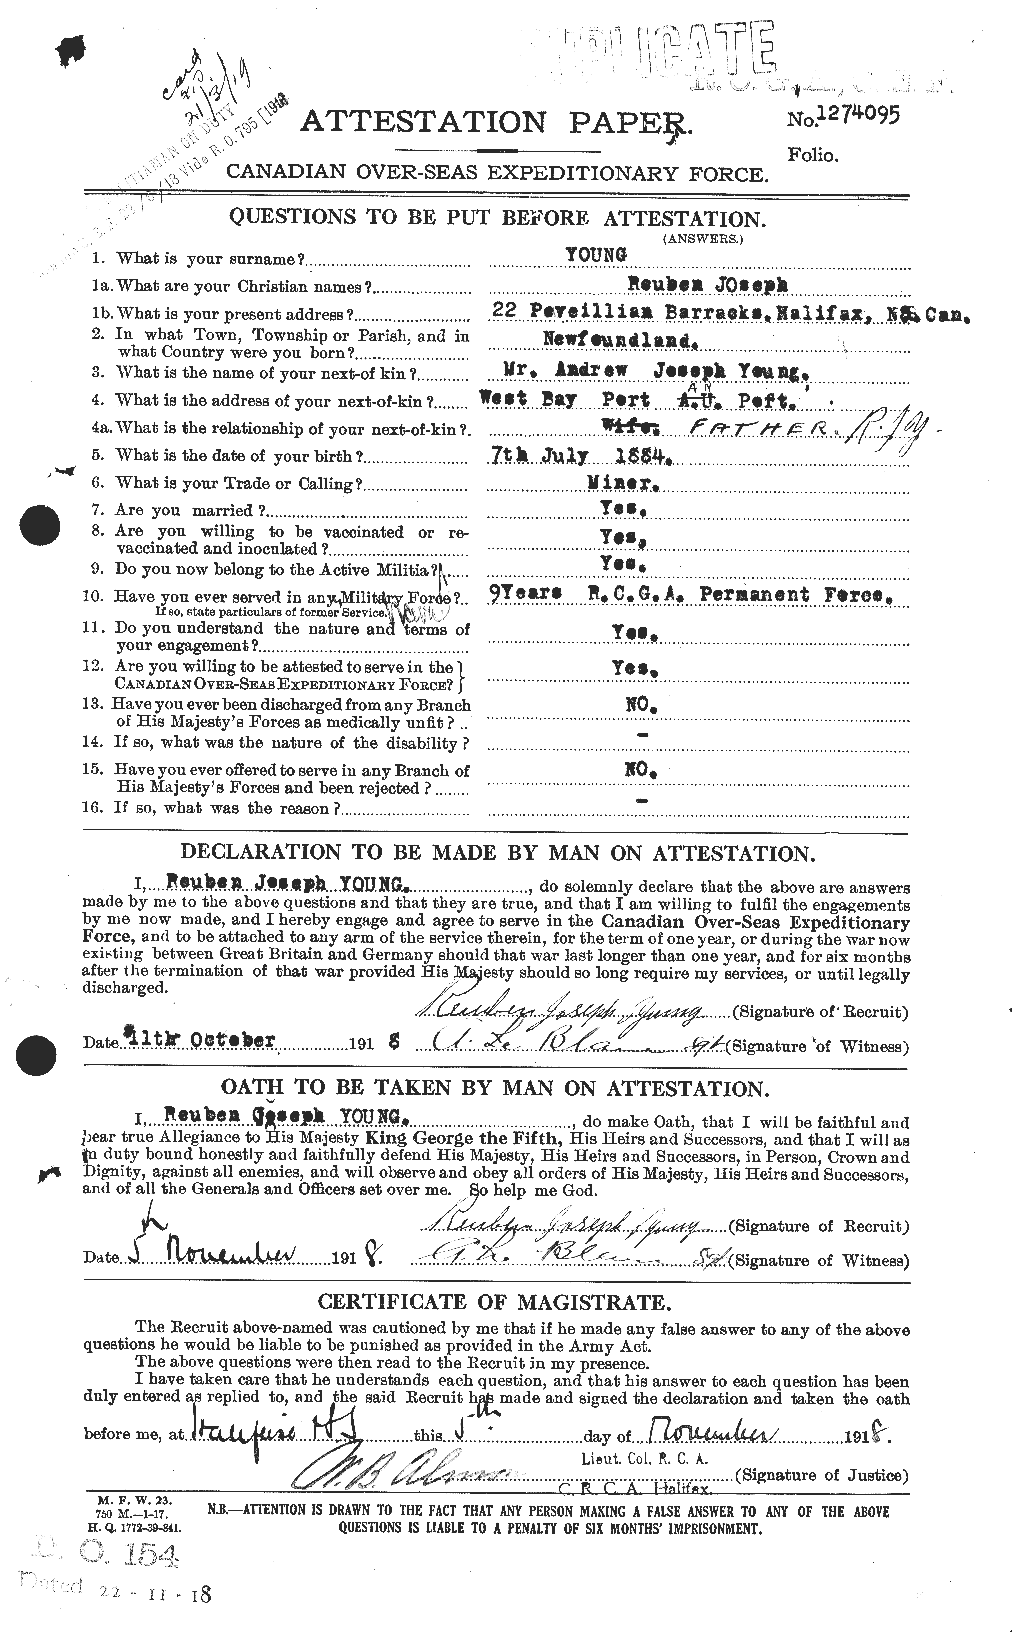 Personnel Records of the First World War - CEF 692122a